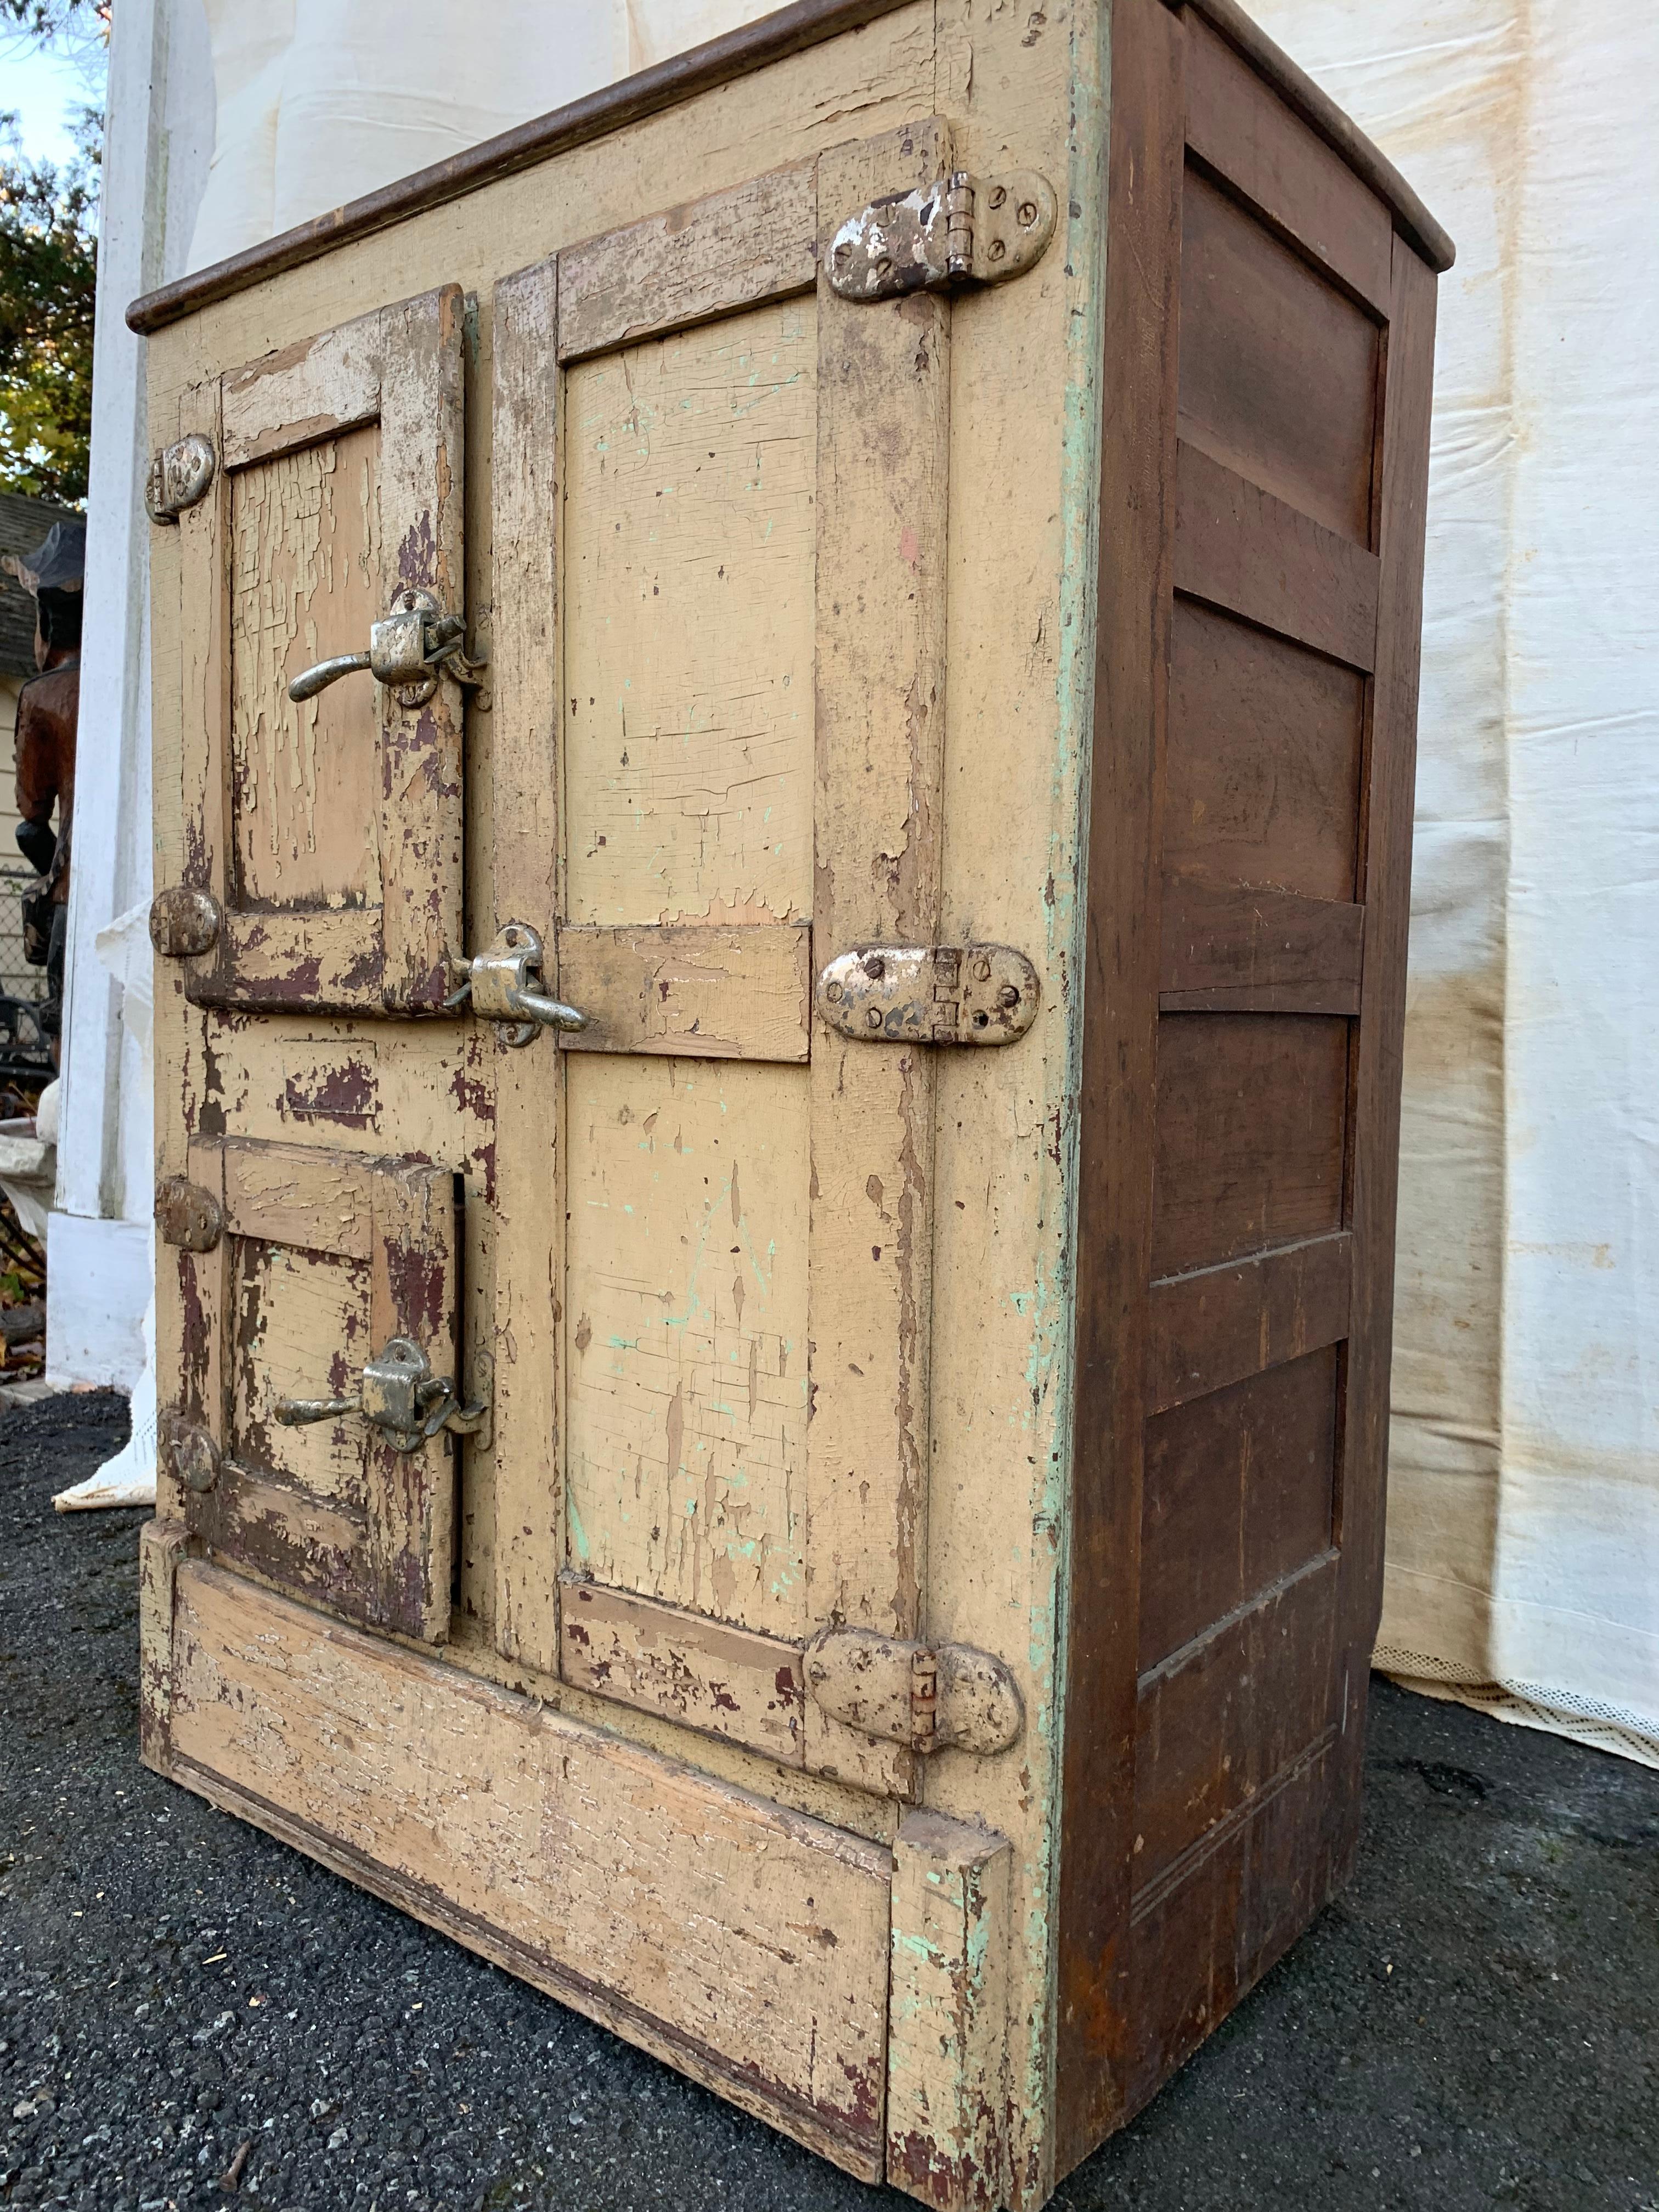 A funky distressed vintage ice chest with great original chippy paint with lots of character. A cool piece to use for storage with an industrial vibe.